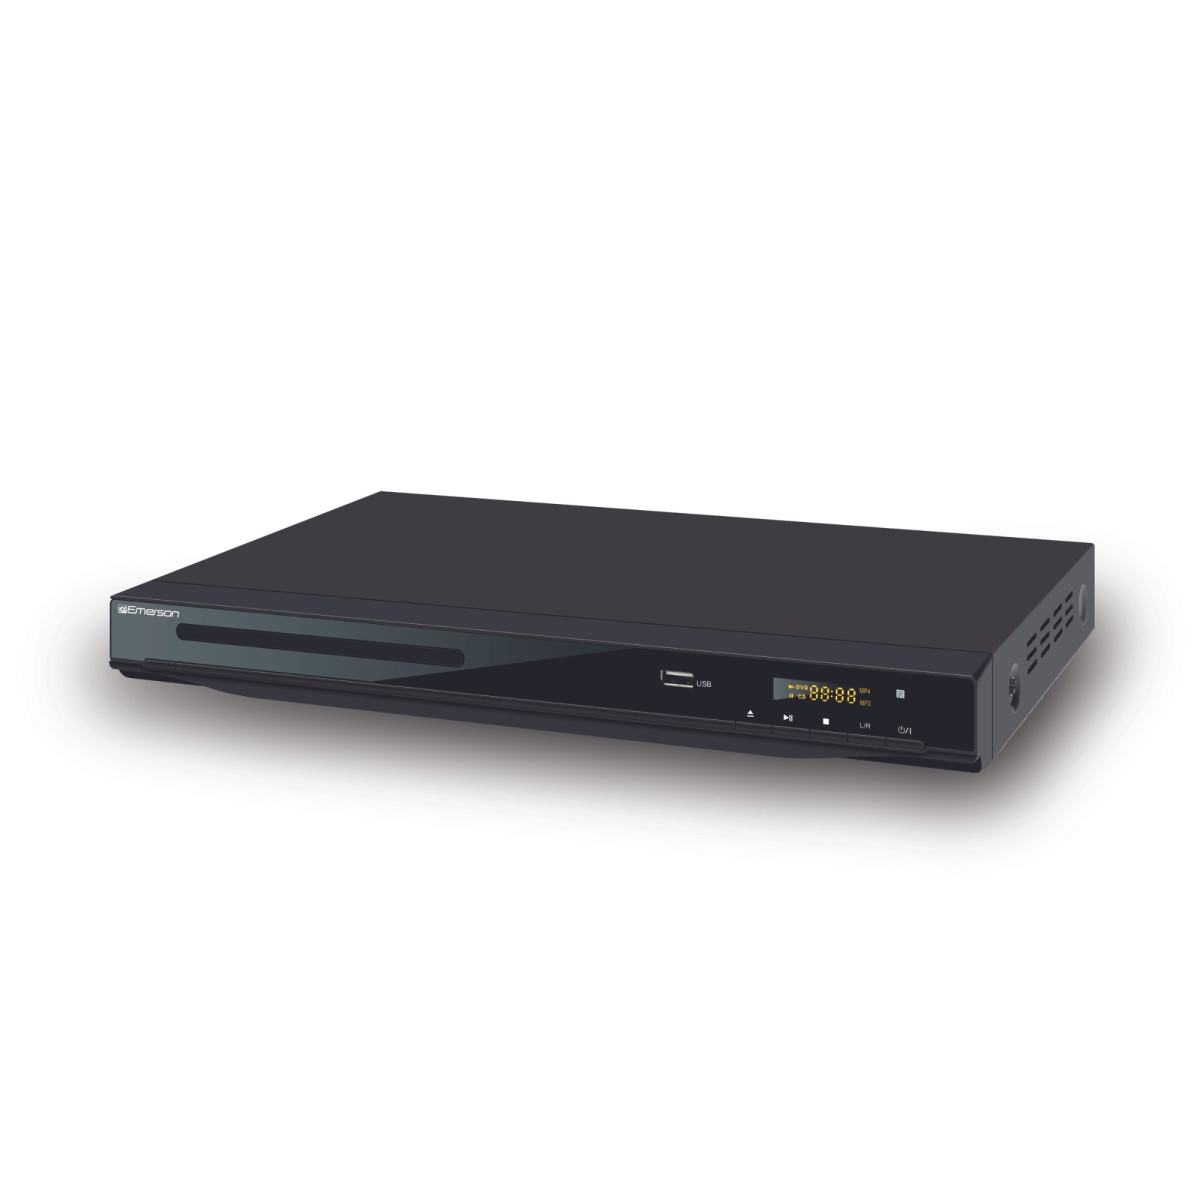 Picture of Emerson ED-8000-EM Emerson DVD Player with HD Upconversion